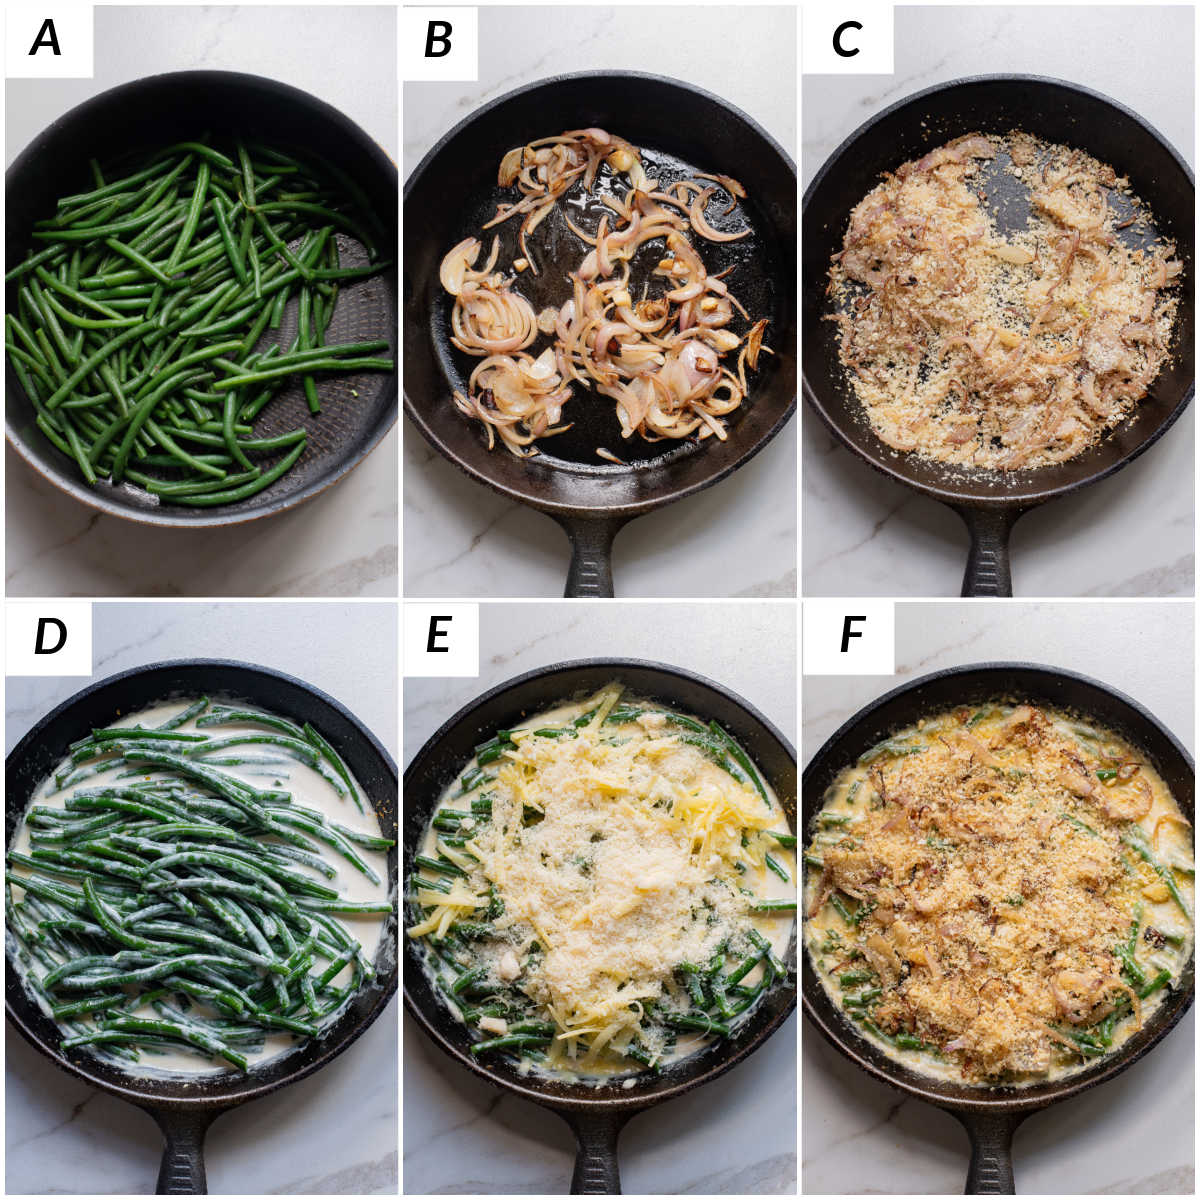 image collage showing the steps for making this green bean casserole recipe